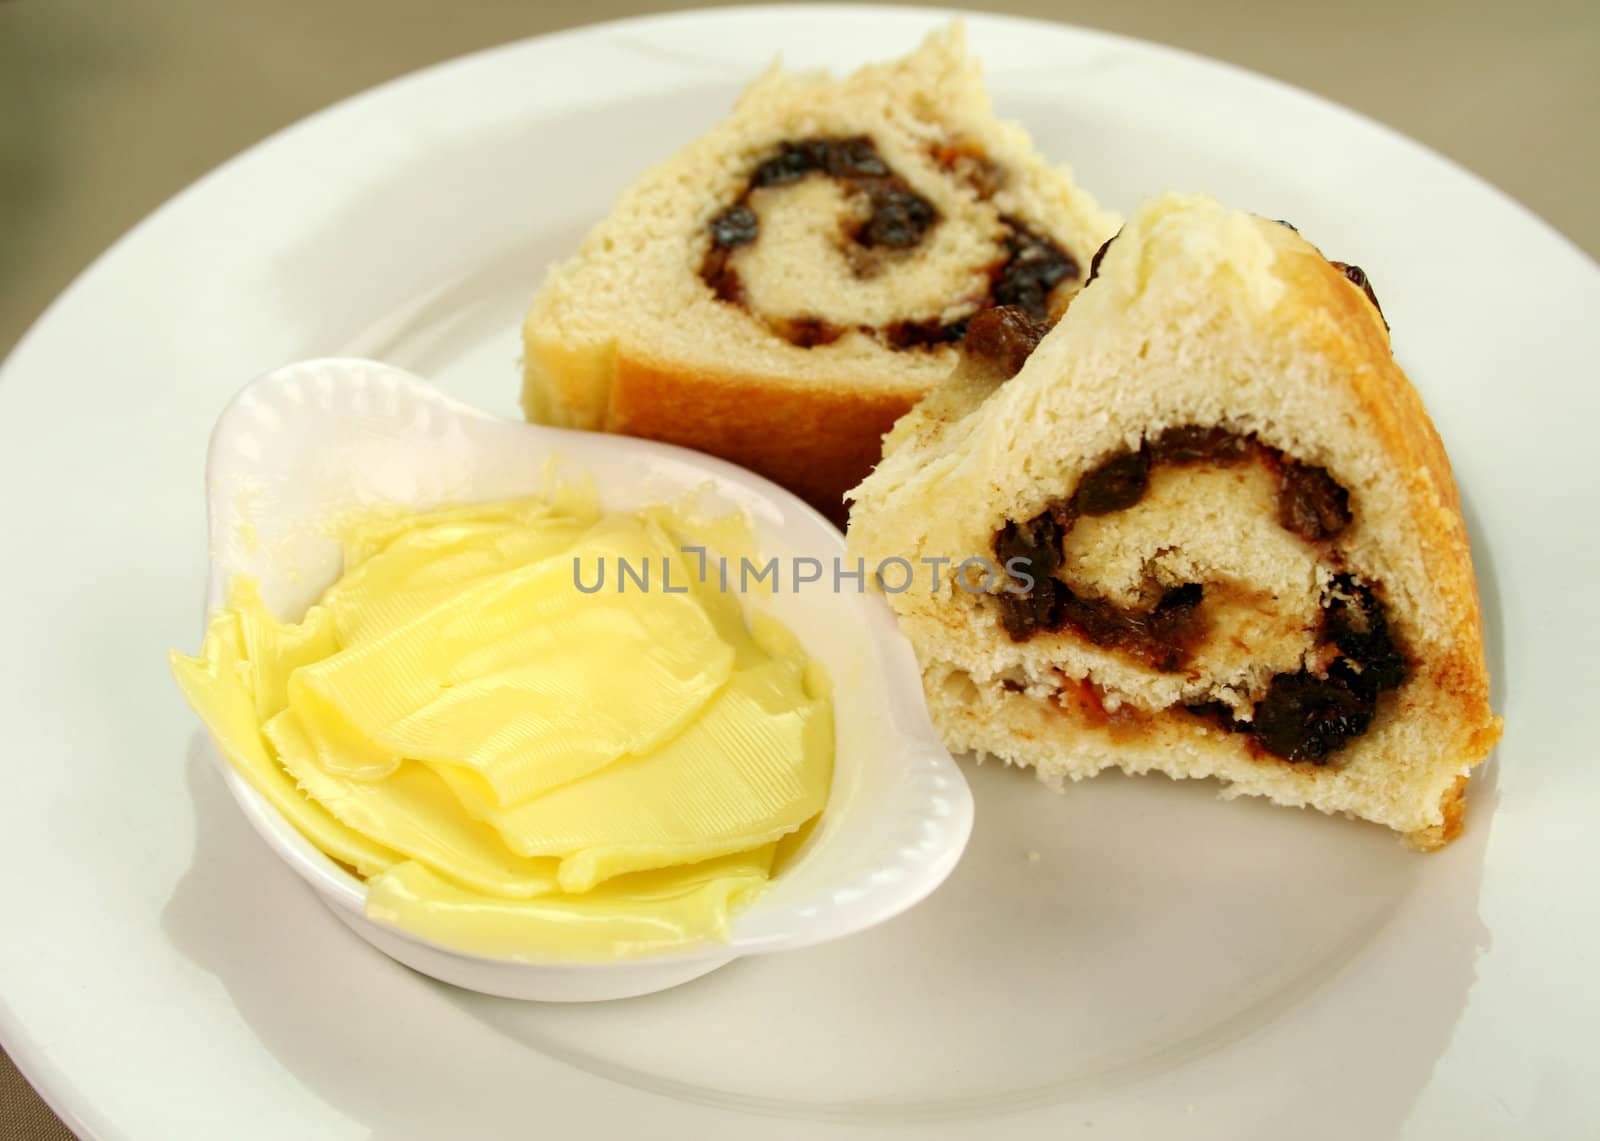 Delicious sliced chelsea bun with dried fruit and butter ready to serve.